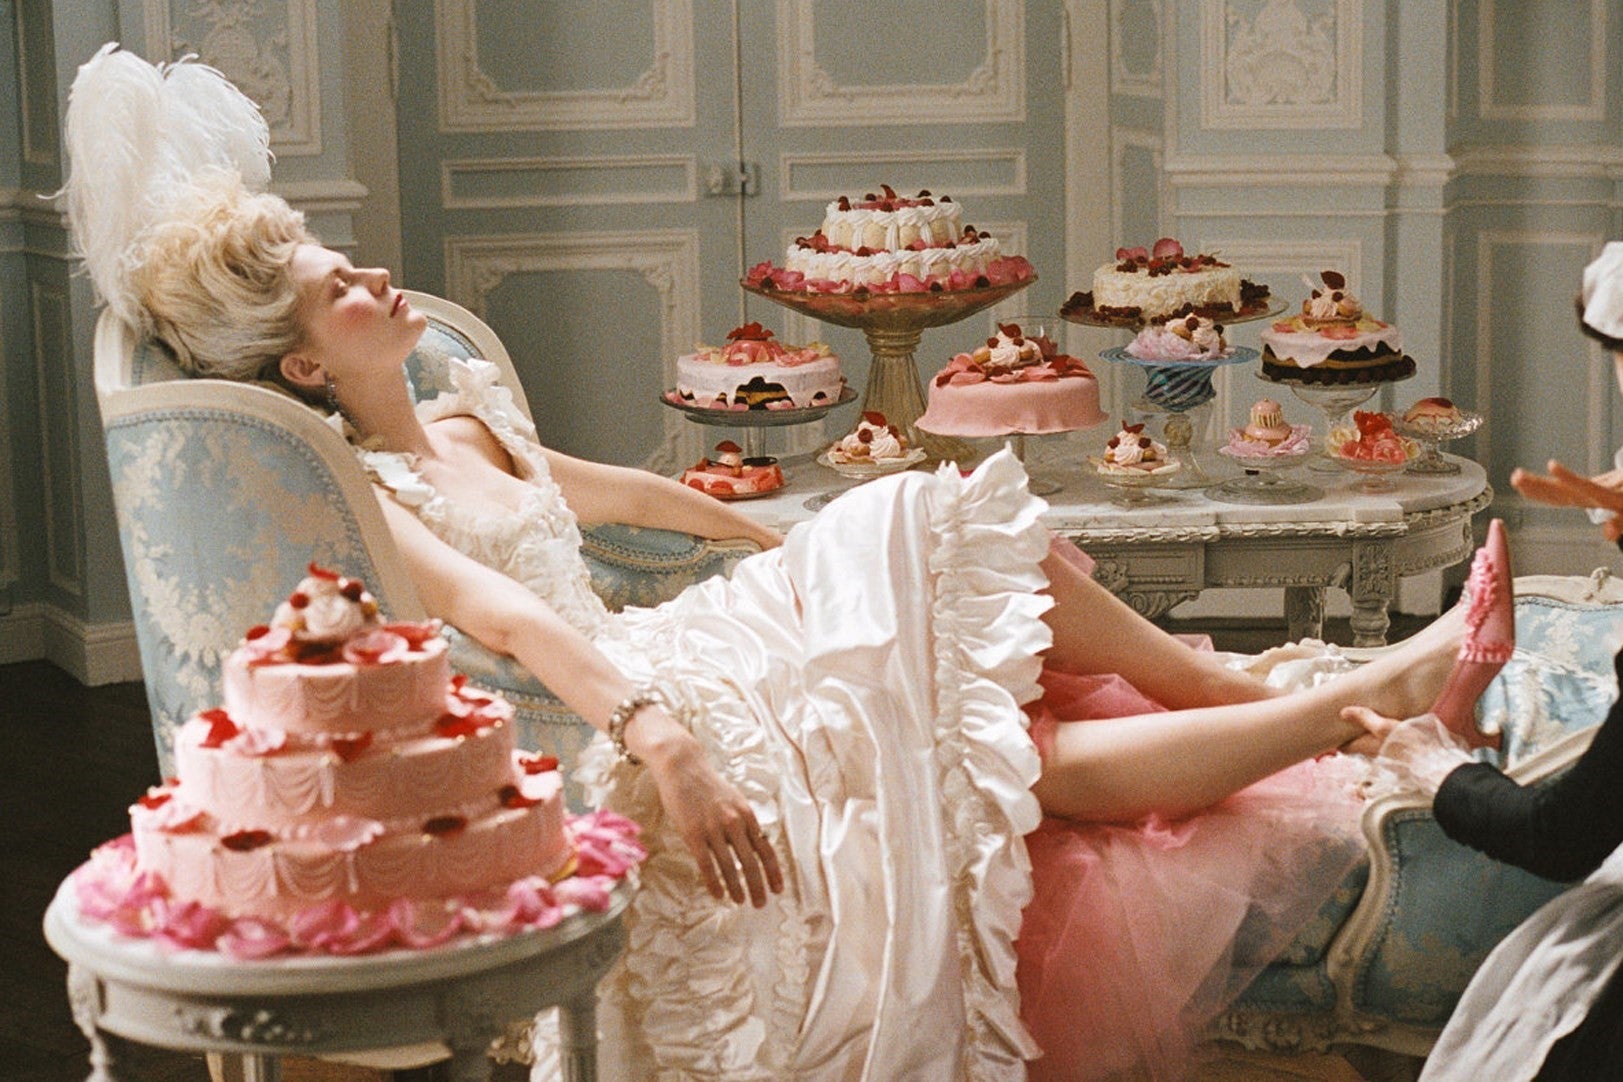 A maid holds Kirsten Dunst's foot who is dressed as Marie Antoinette in an elaborate white dress and headdress while lounging surrounded by cakes and pastries. 